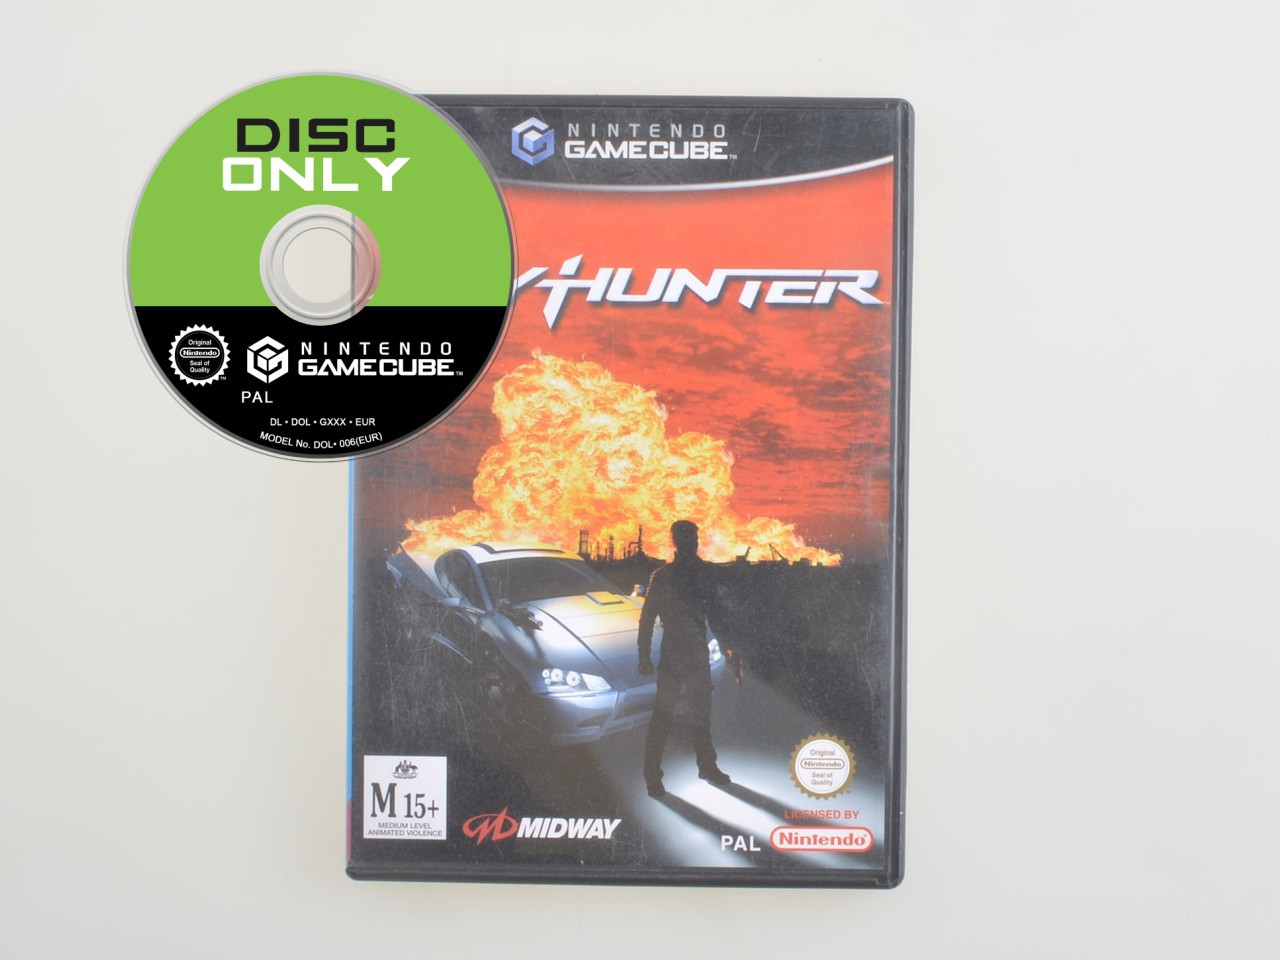 Spy Hunter - Disc Only - Gamecube Games